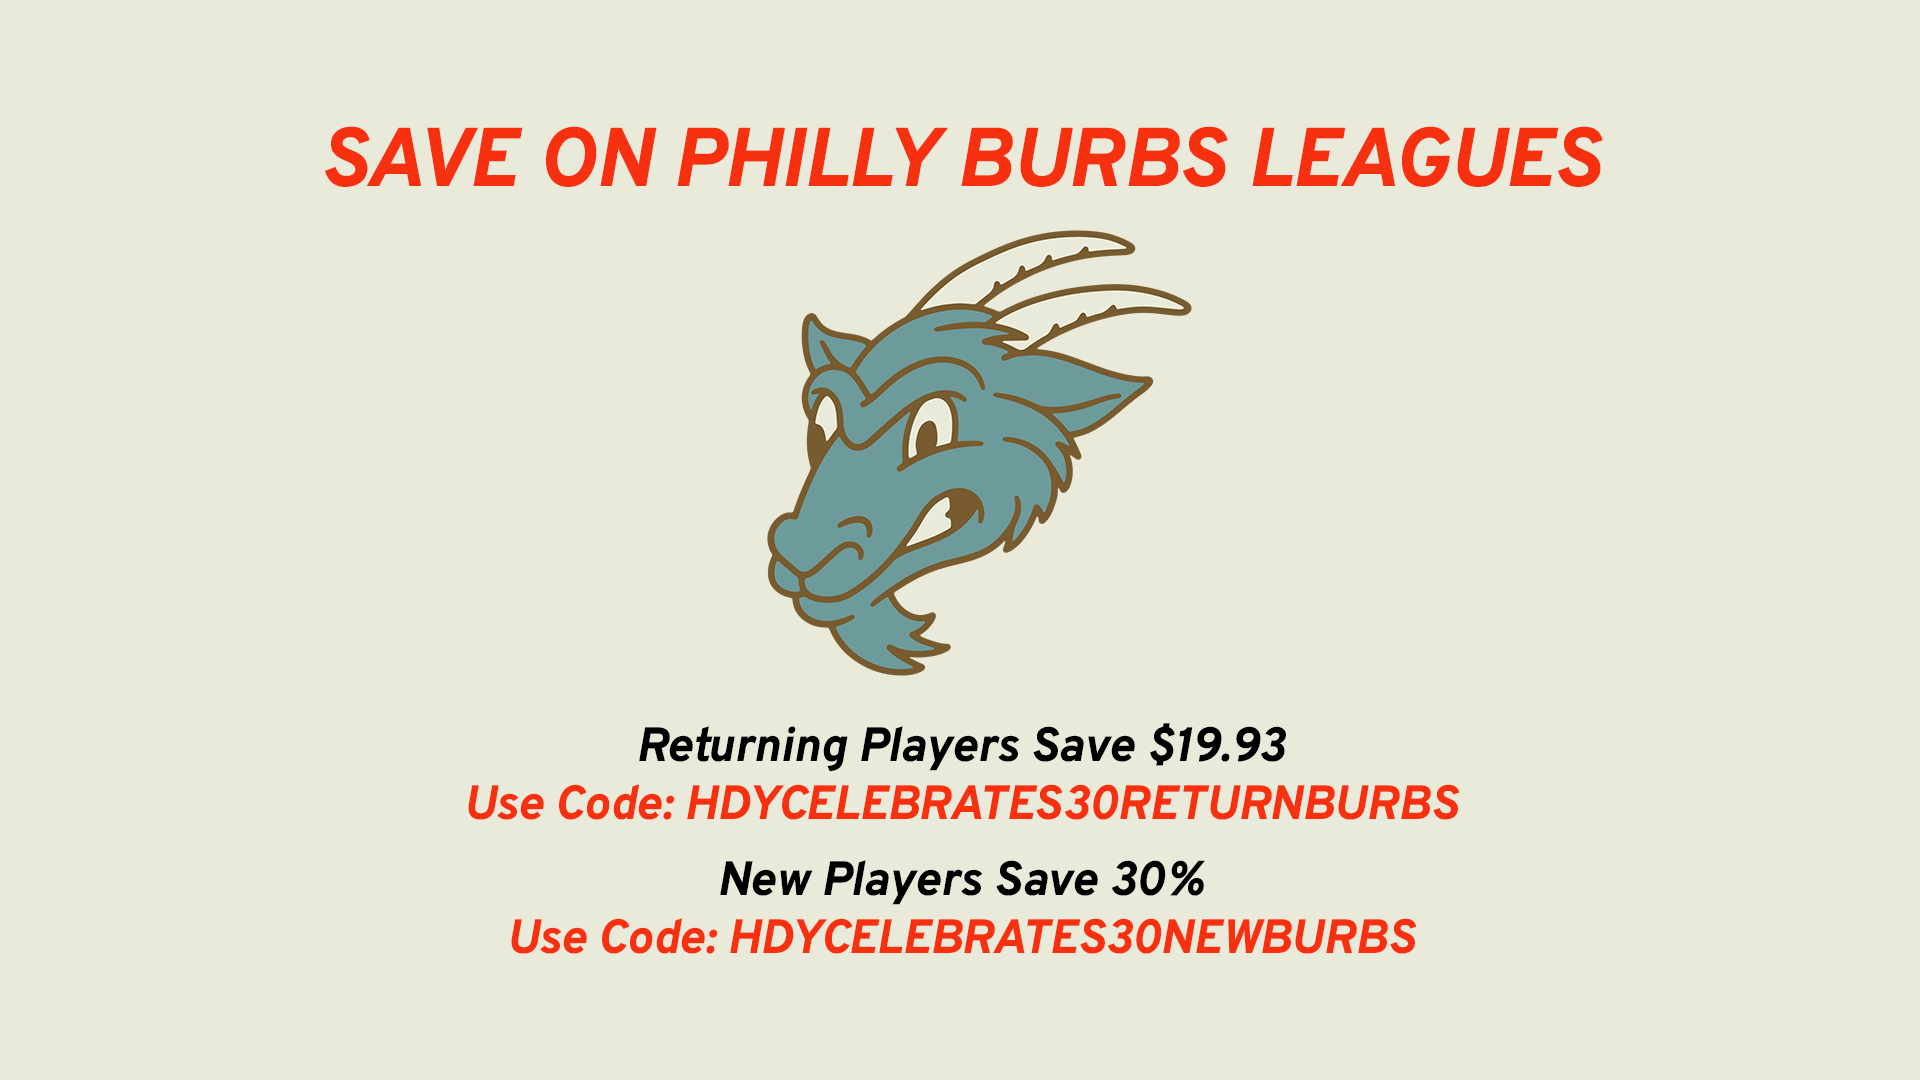 SAVE_PHILLYBURBSLEAGUES_SEPTA_1920x1080